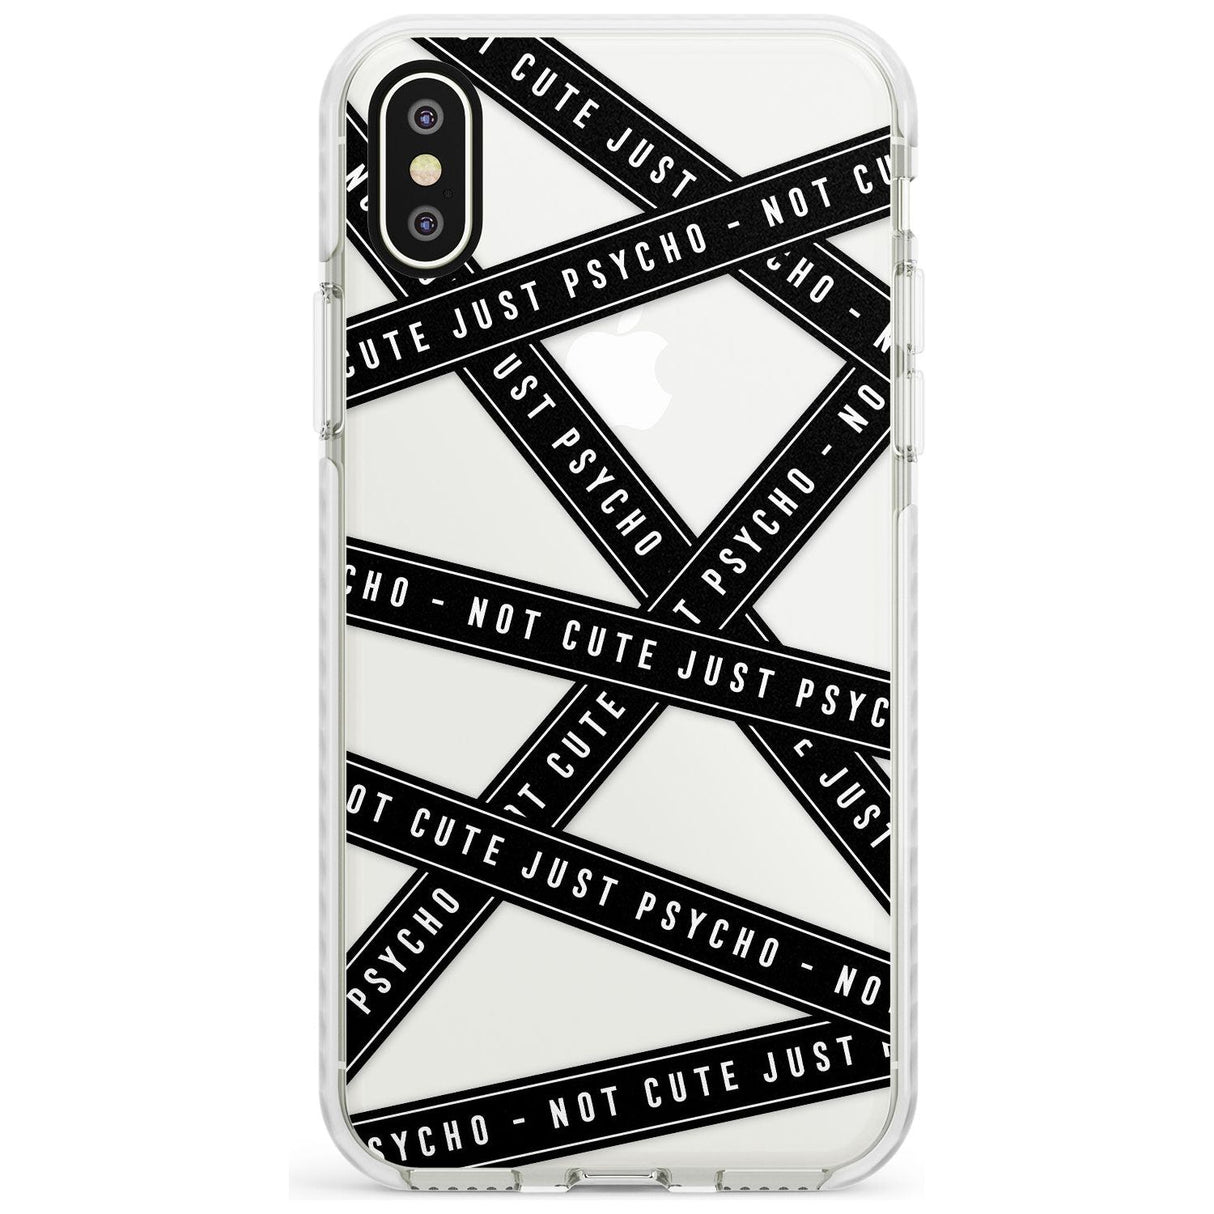 Caution Tape (Clear) Not Cute Just Psycho Impact Phone Case for iPhone X XS Max XR